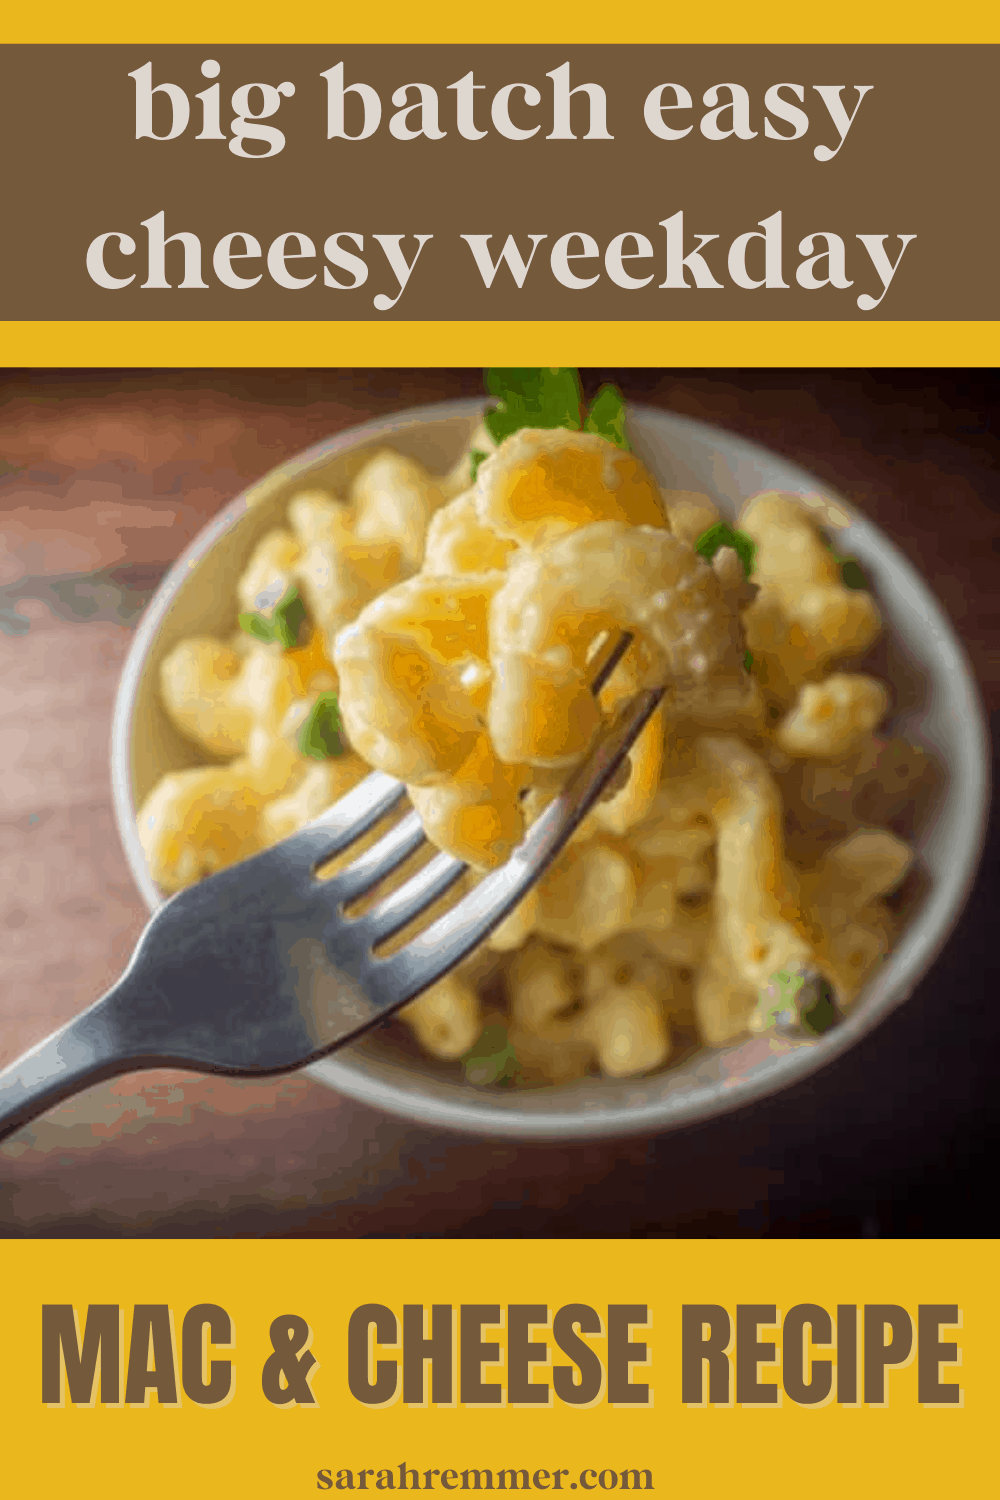 Served with chopped veggies on the side, this quick and easy Mac and Cheese recipe is the perfect instant meal for weekdays! Everyone loves it!